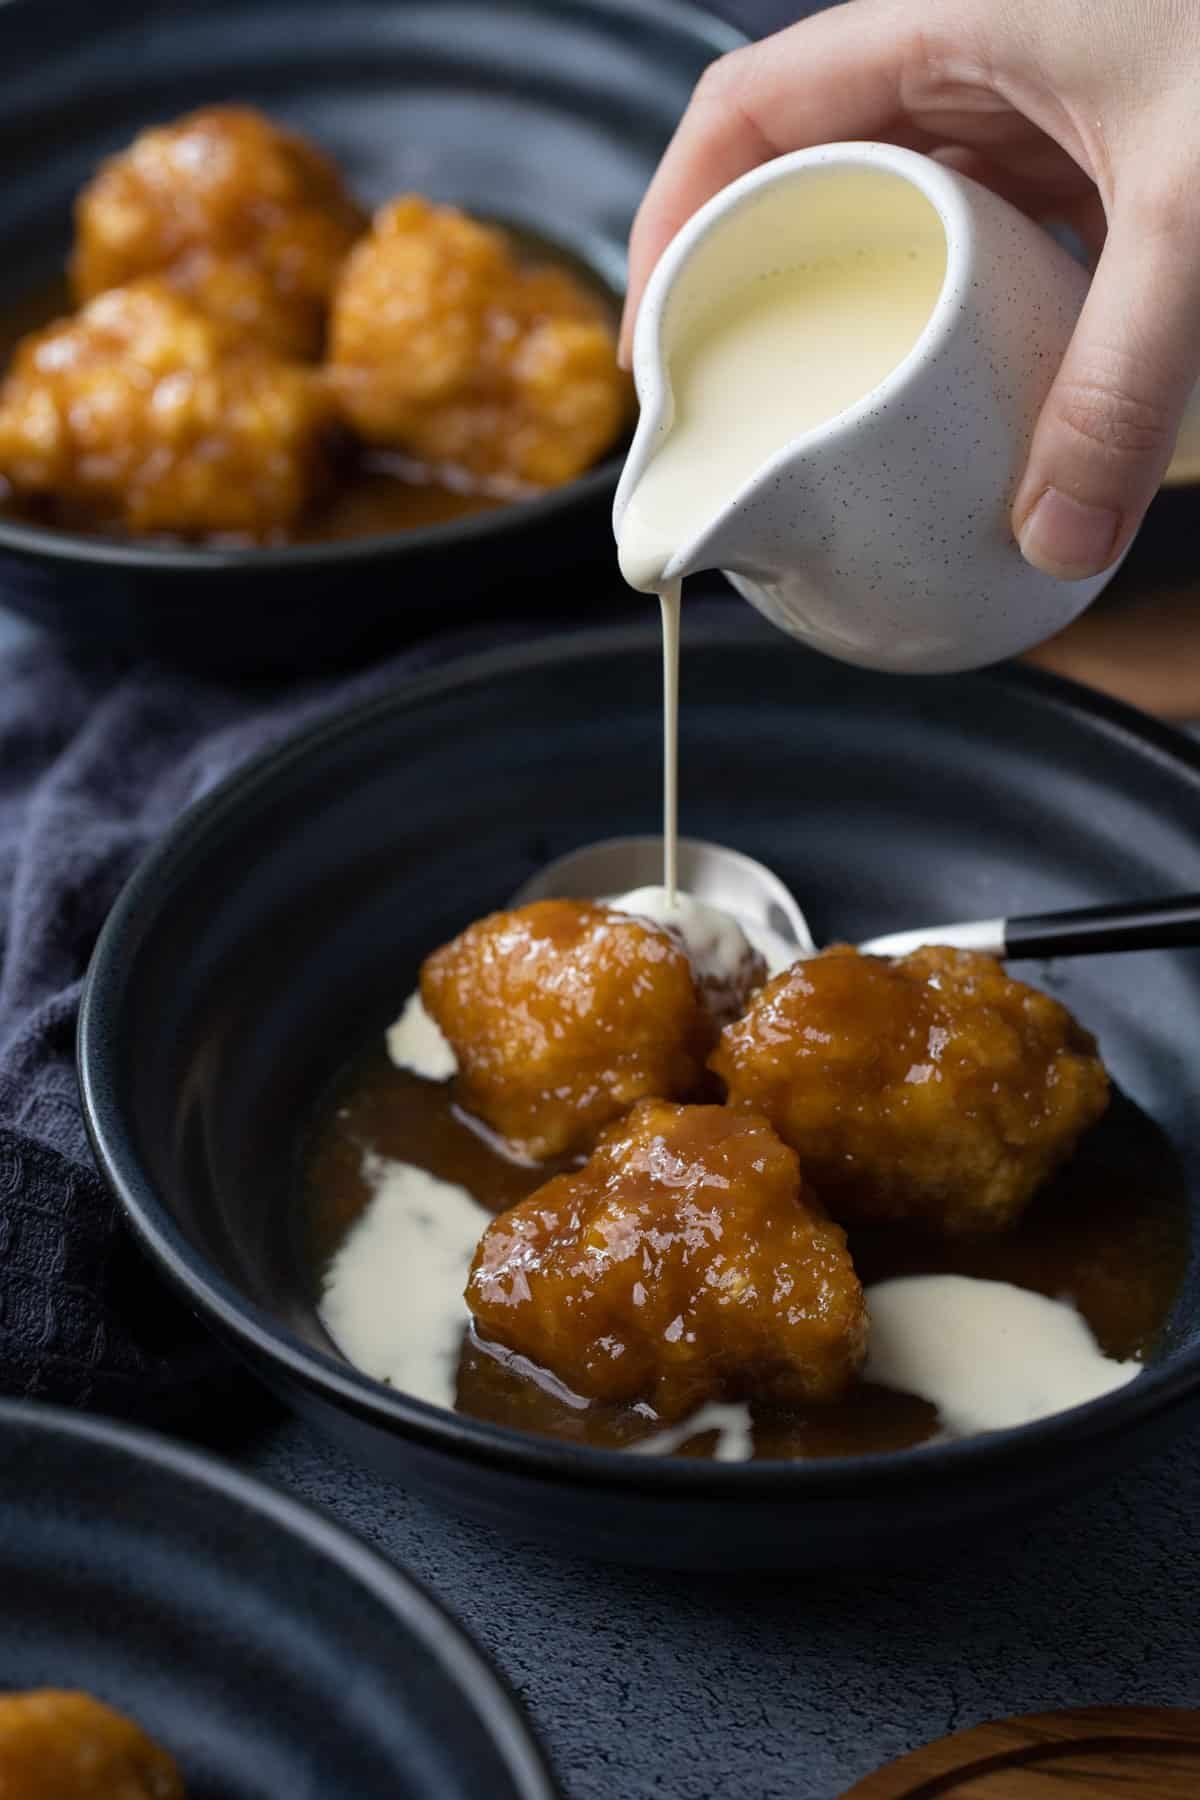 a hand pouring a jug of cream over golden syrup dumplings in a bowl.